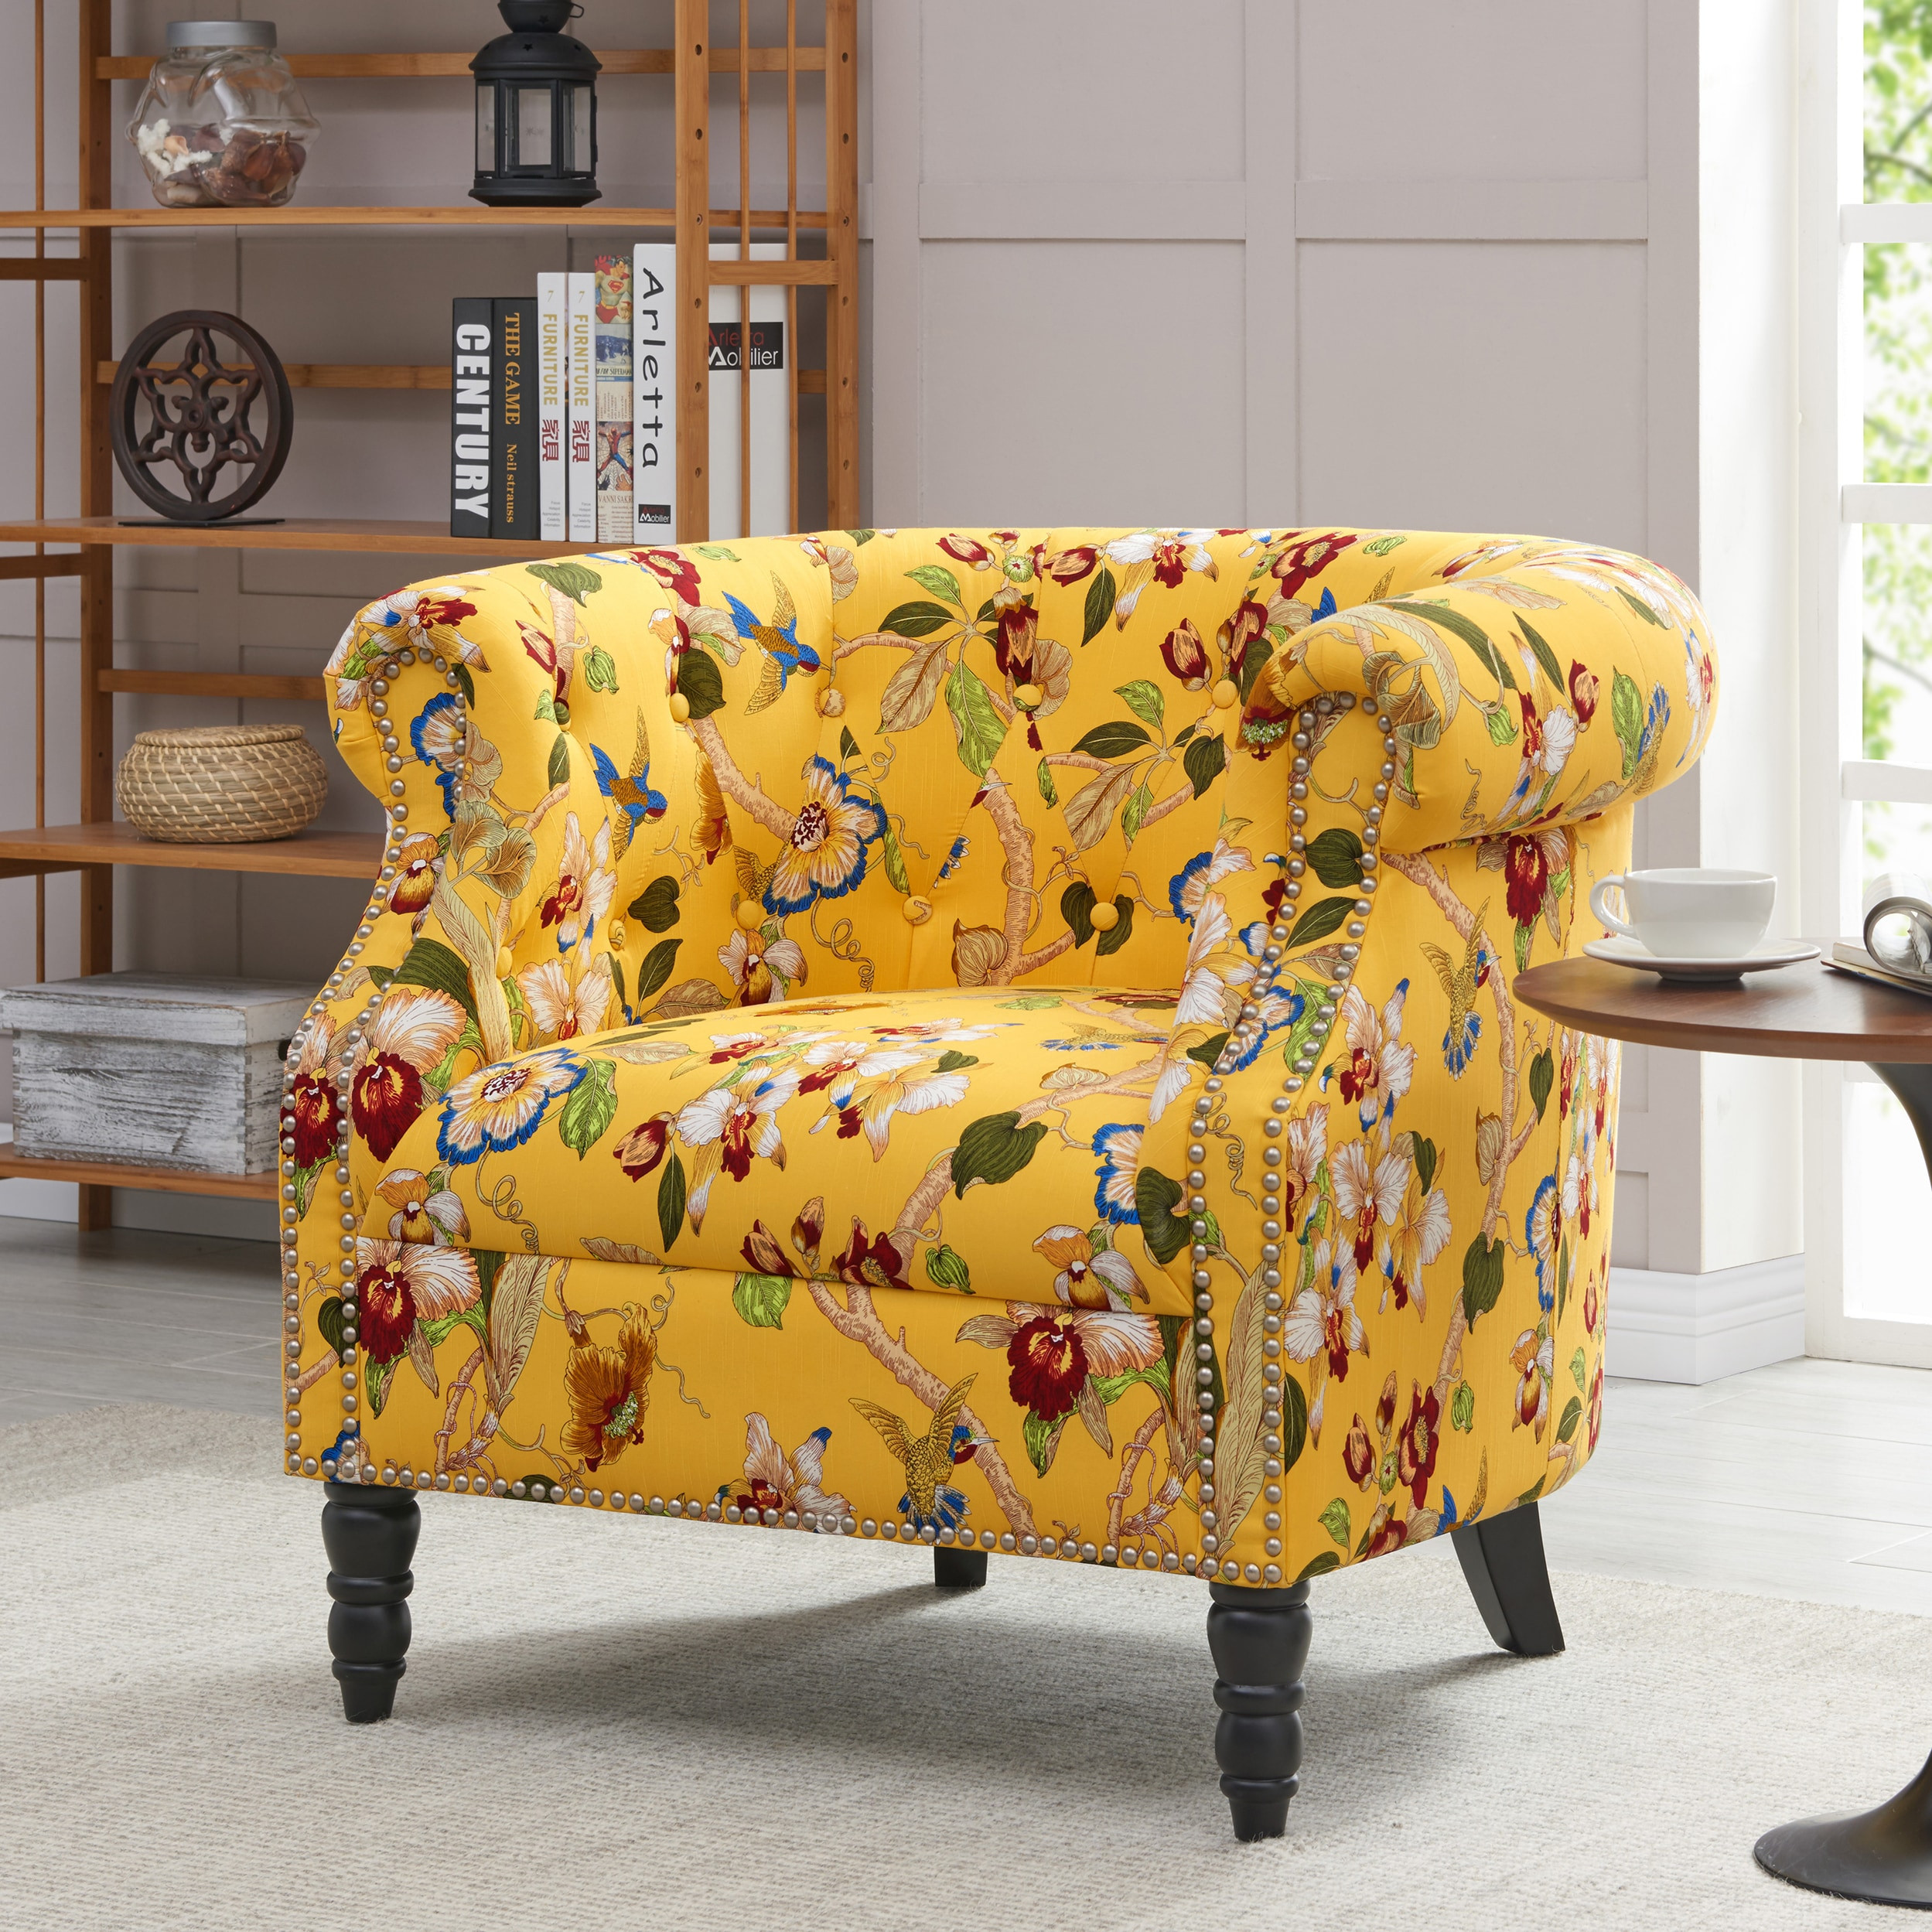 Floral Living Room Chairs
 Shop Handy Living Chesterfield Yellow Multi Floral with